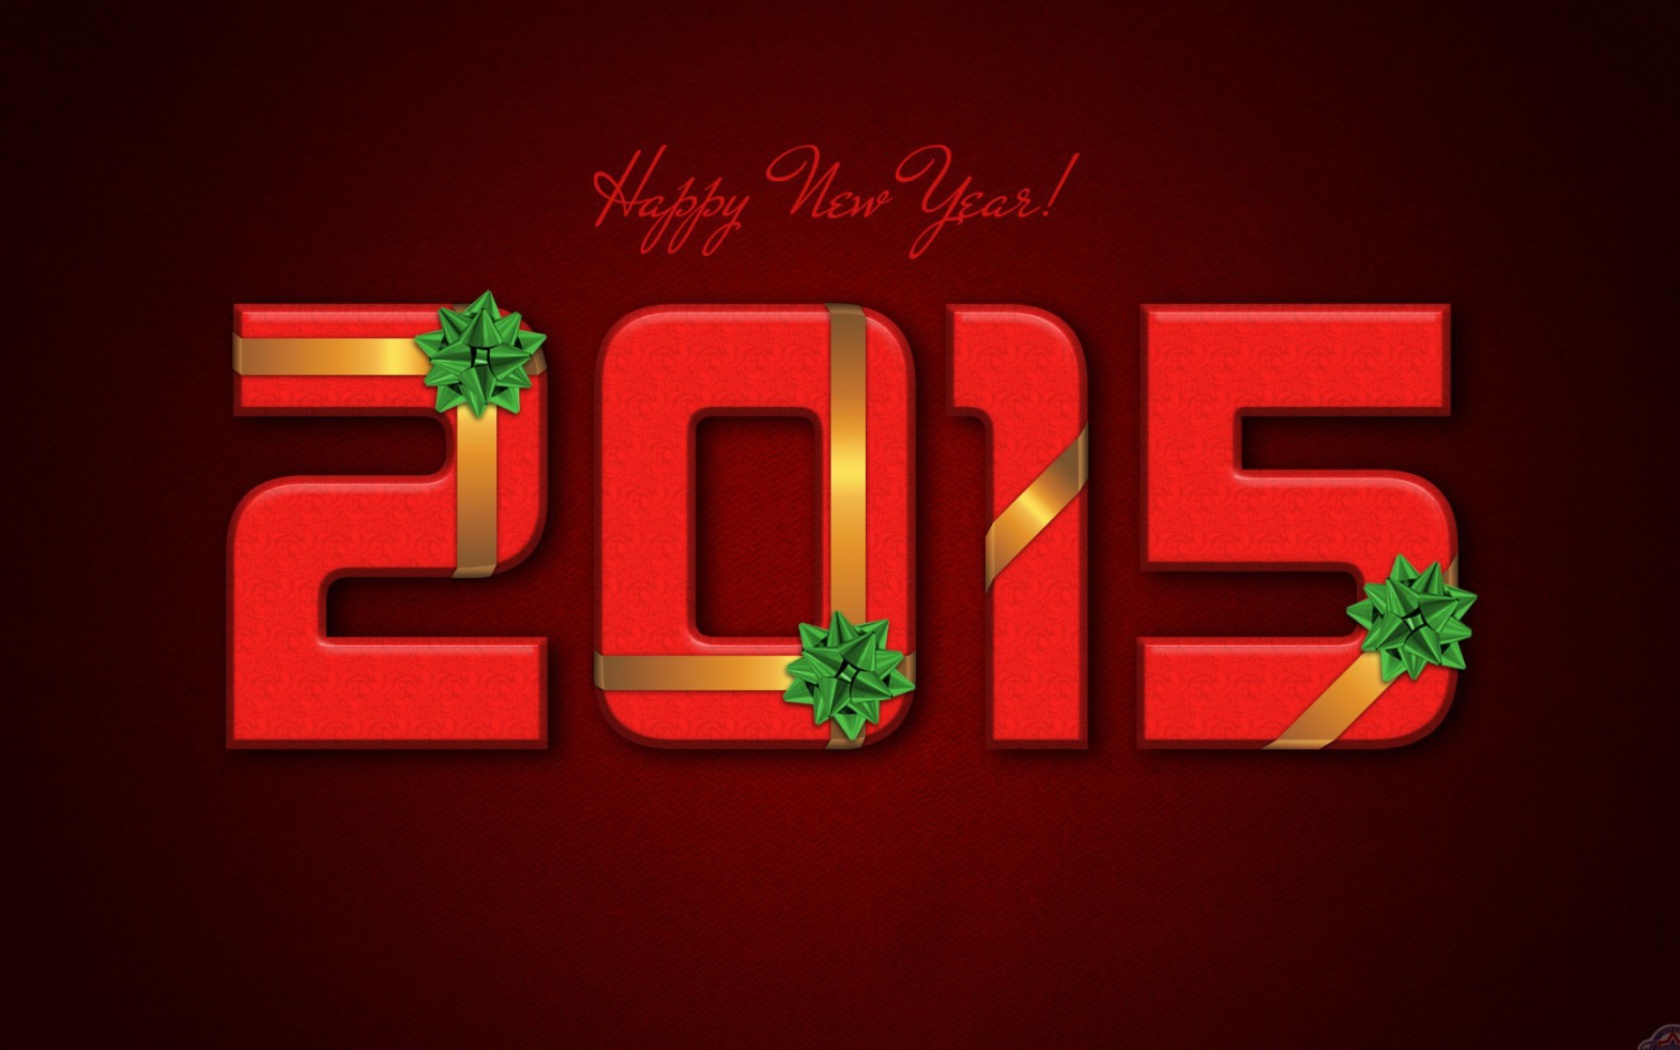 New Year 2015 Red Texture wallpaper 1680x1050